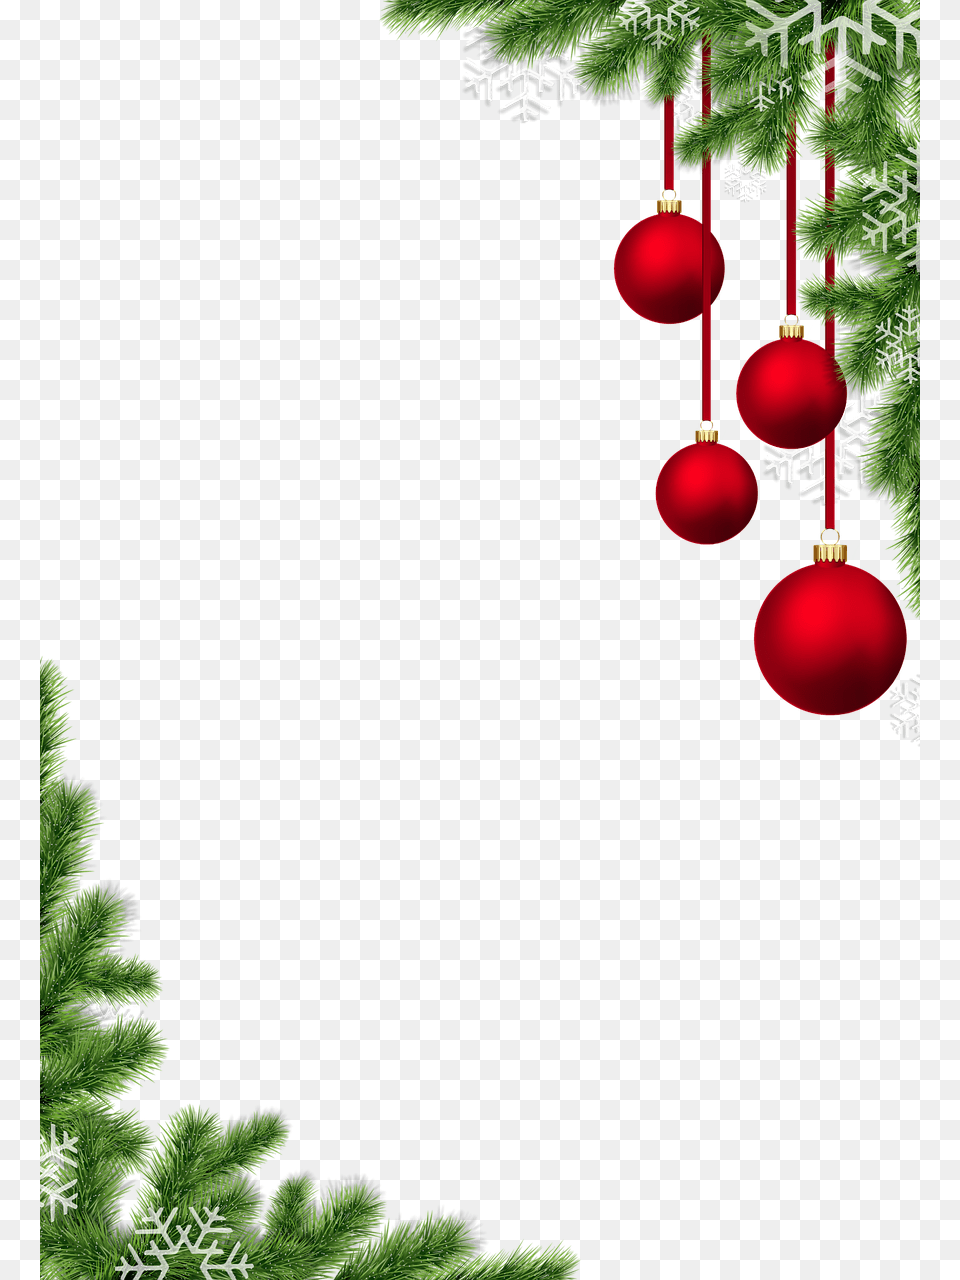 Christmas Massage Year 2018, Plant, Tree, Accessories, Christmas Decorations Png